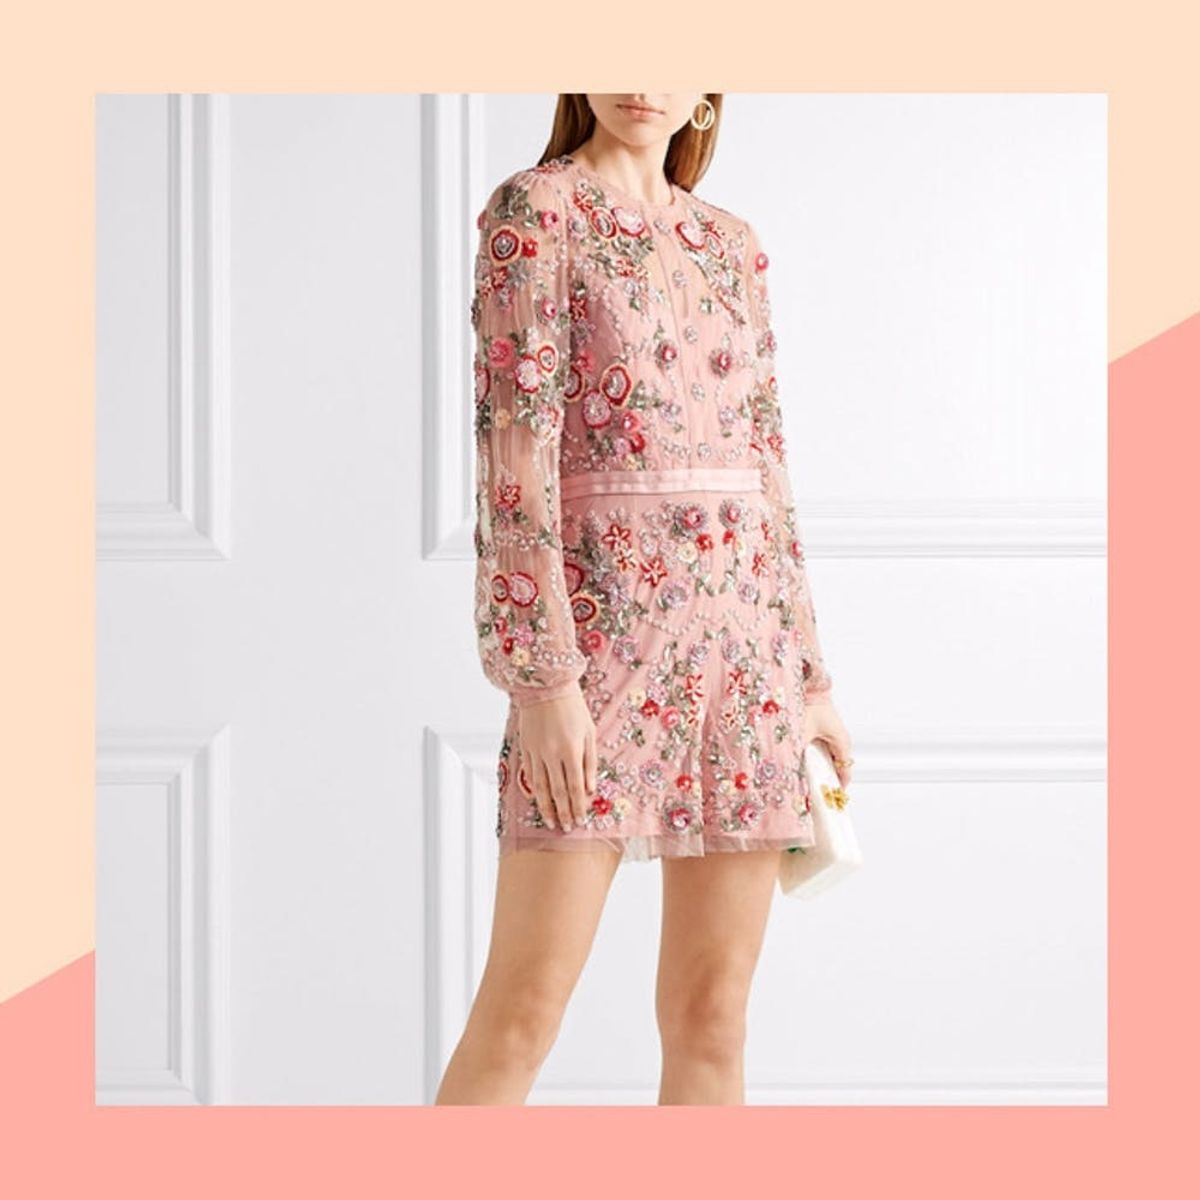 Sorry, Bridesmaid Dresses: Rompers Are the Newest Trend for Bridal Fashion